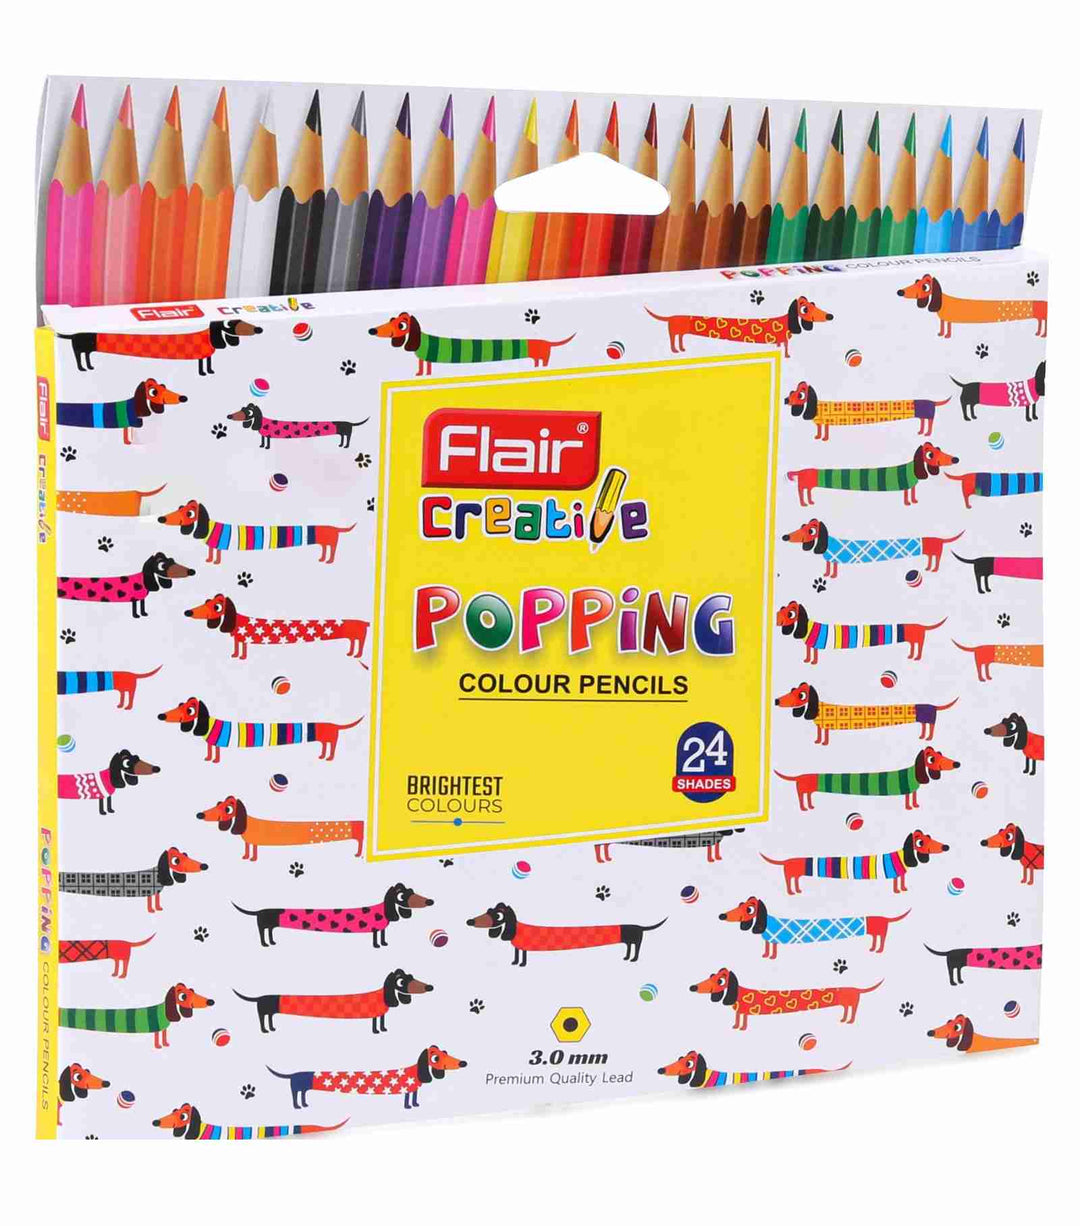 A Pack of 24 shades of Flair Creative Popping Colour Pencil Kit